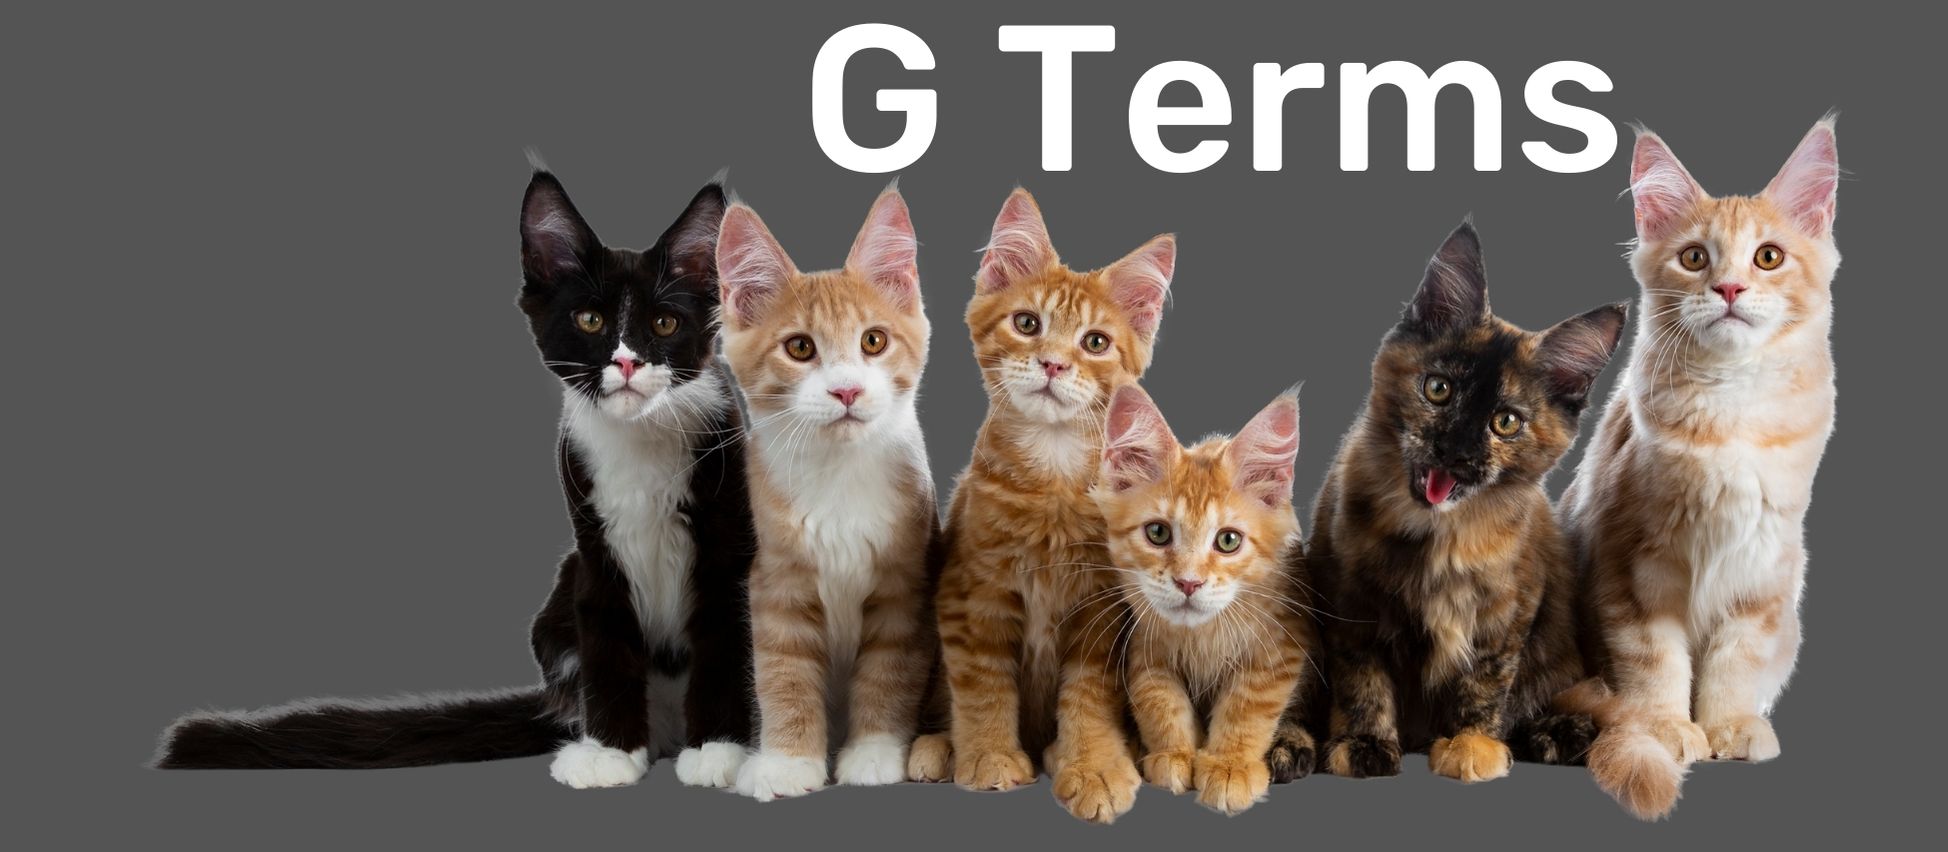 Group of six cats in front of a gray background with text reading 'G Terms' at the top to indicate a new section of the glossary